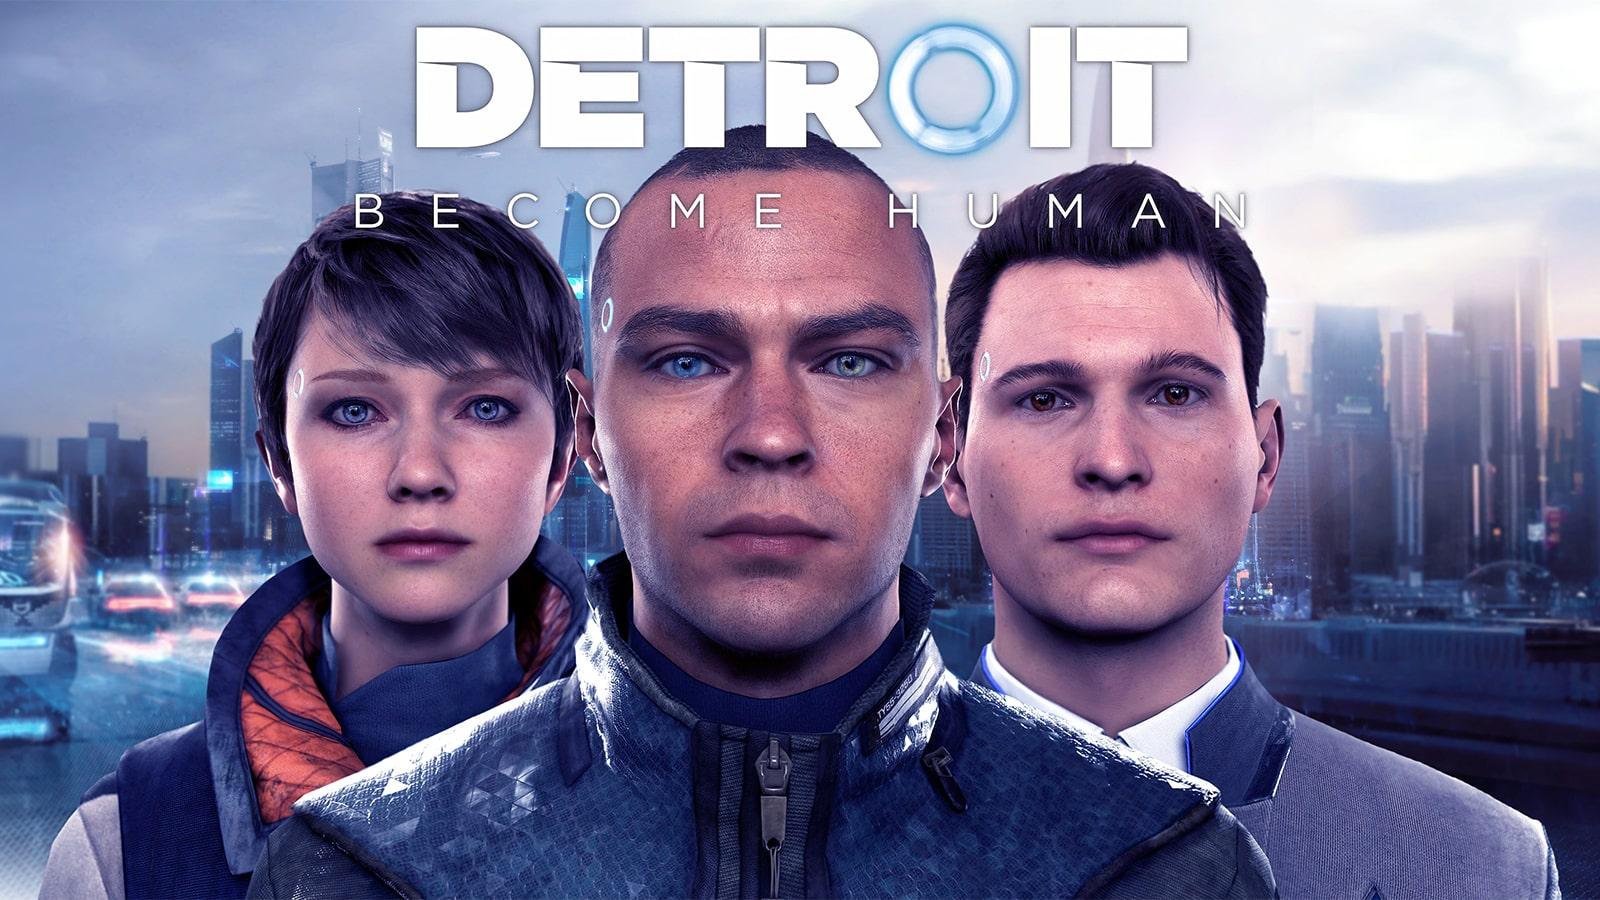 NYCC – The Cast of 'Detroit: Become Human